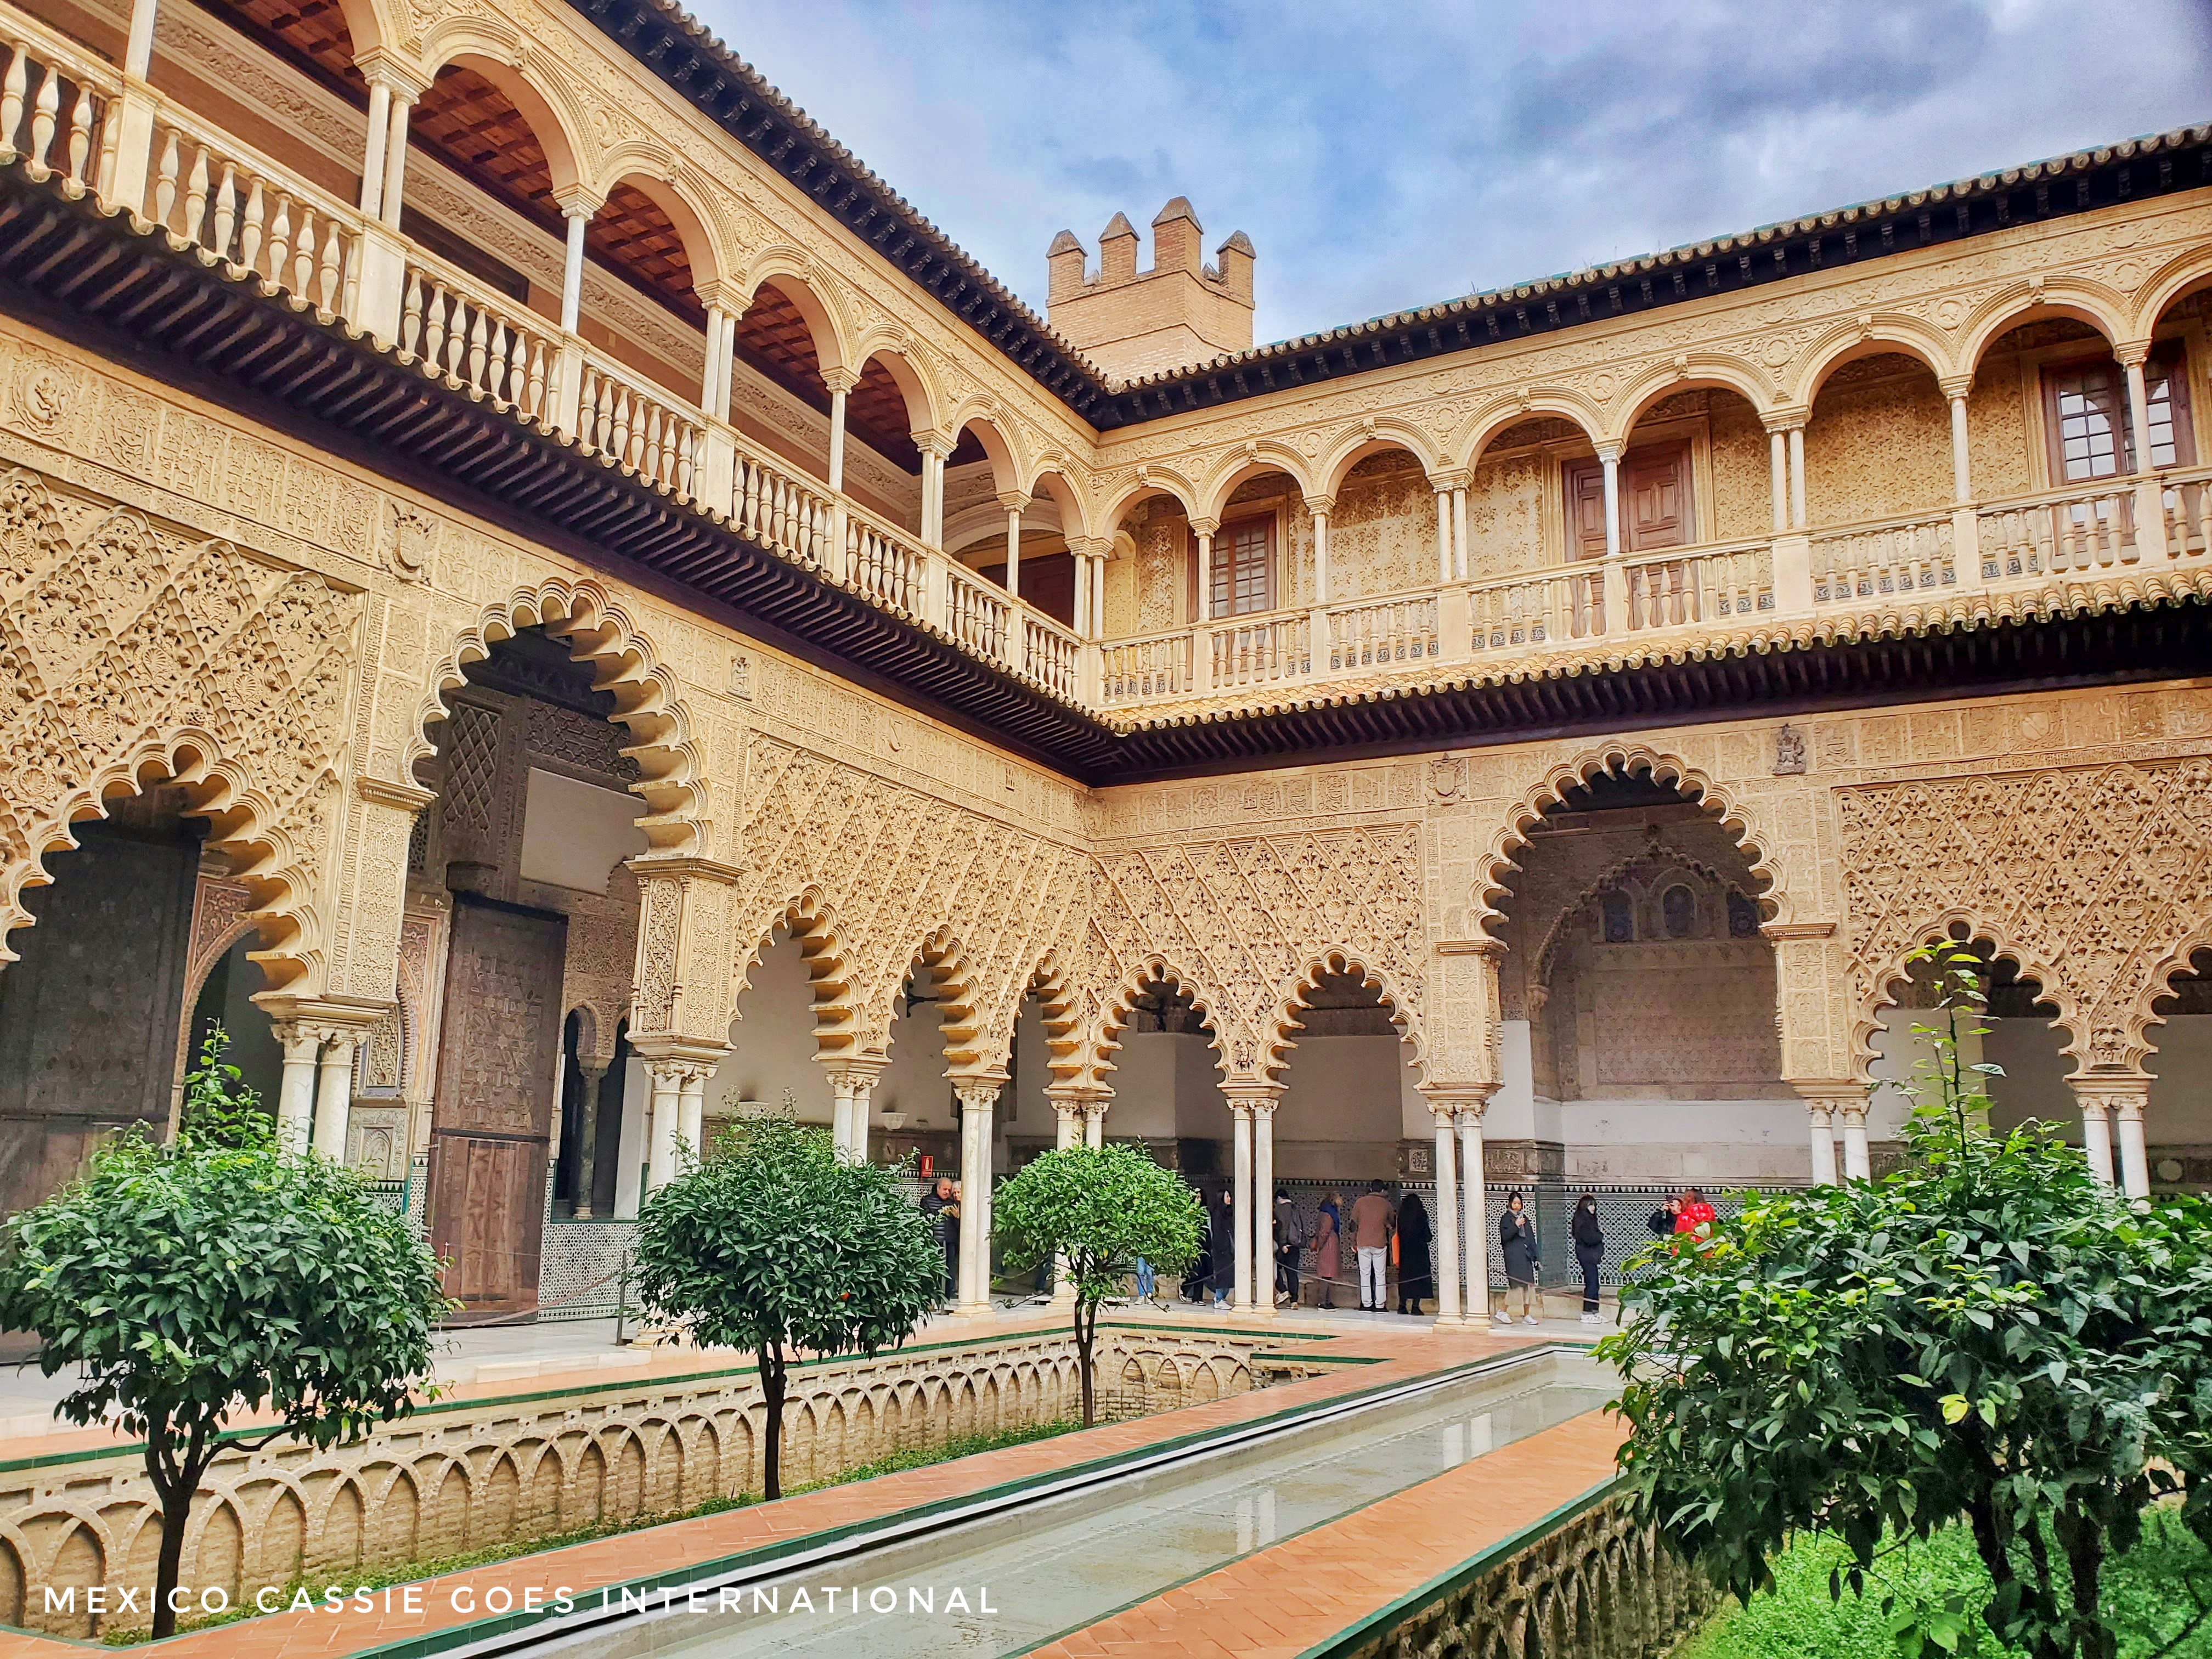 view of the main patio in the alcazar of seville. reflecting pool, small trees and 2 storey building with many arches